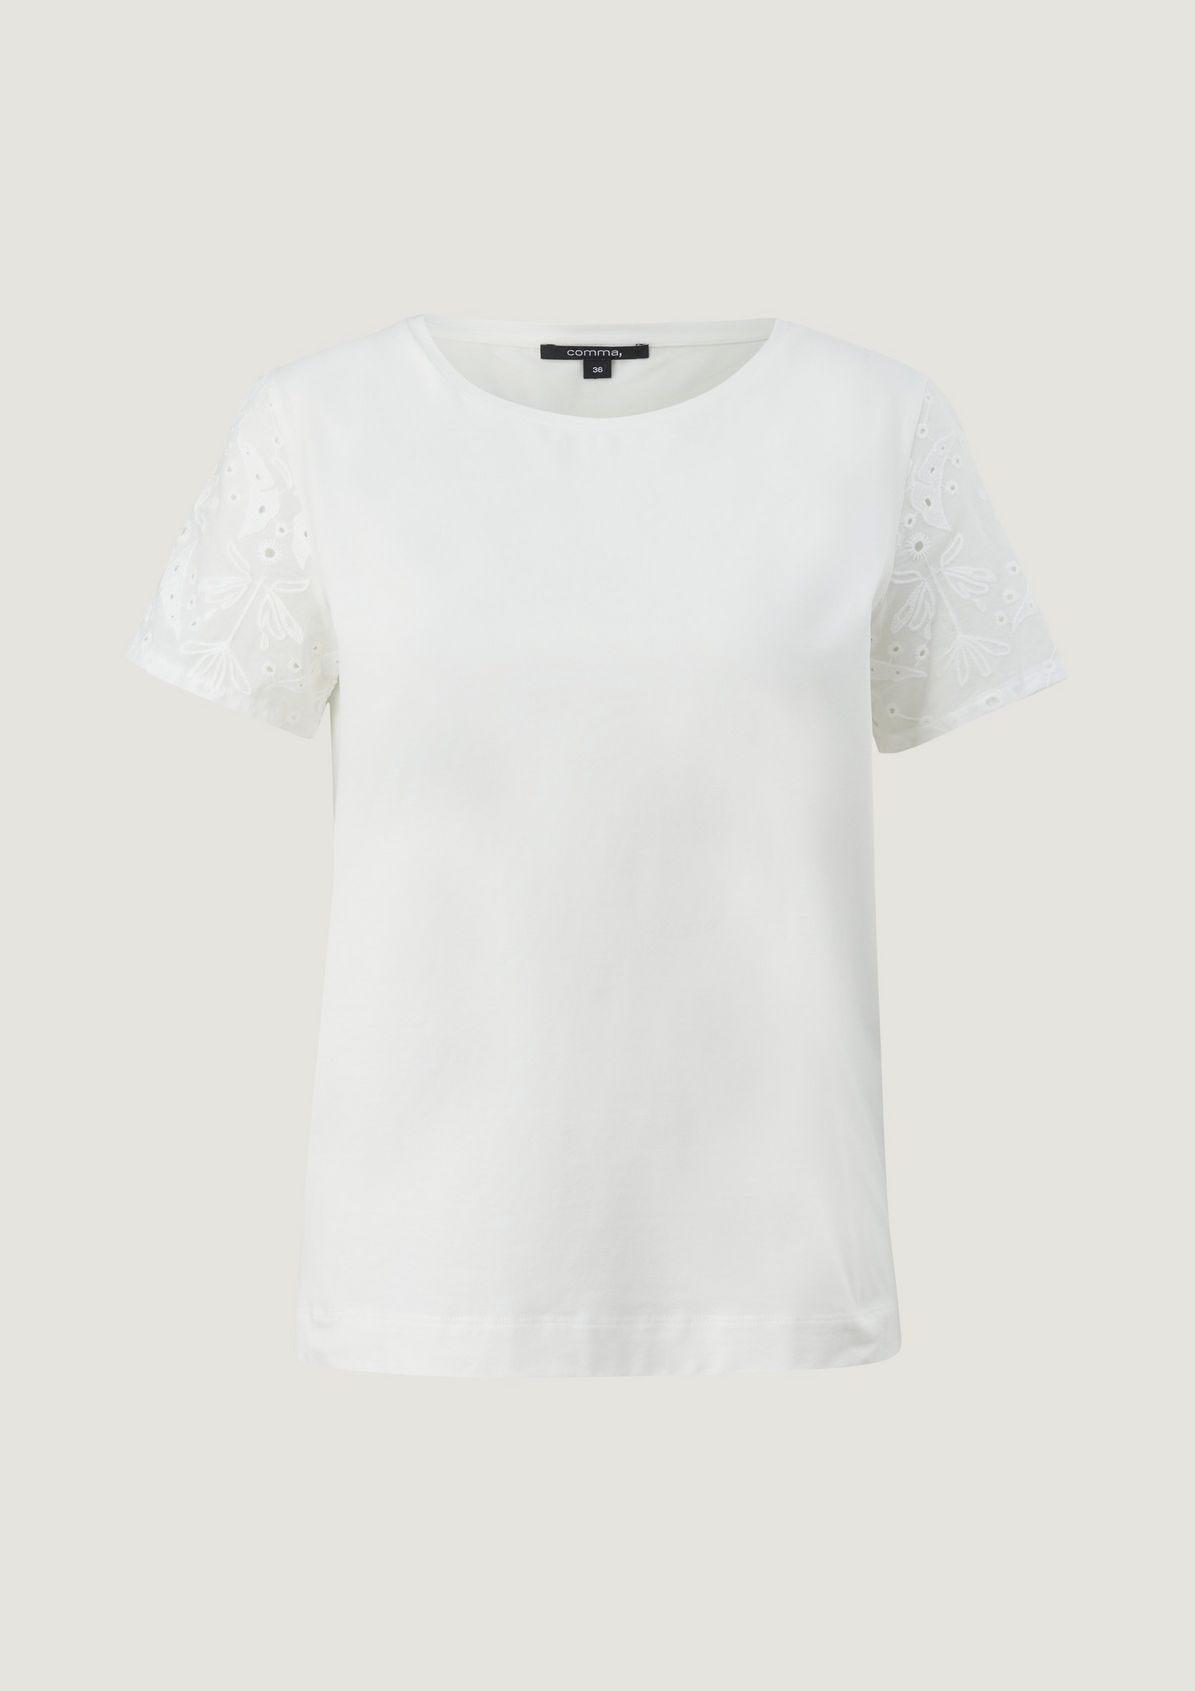 Jersey top with lace details from comma